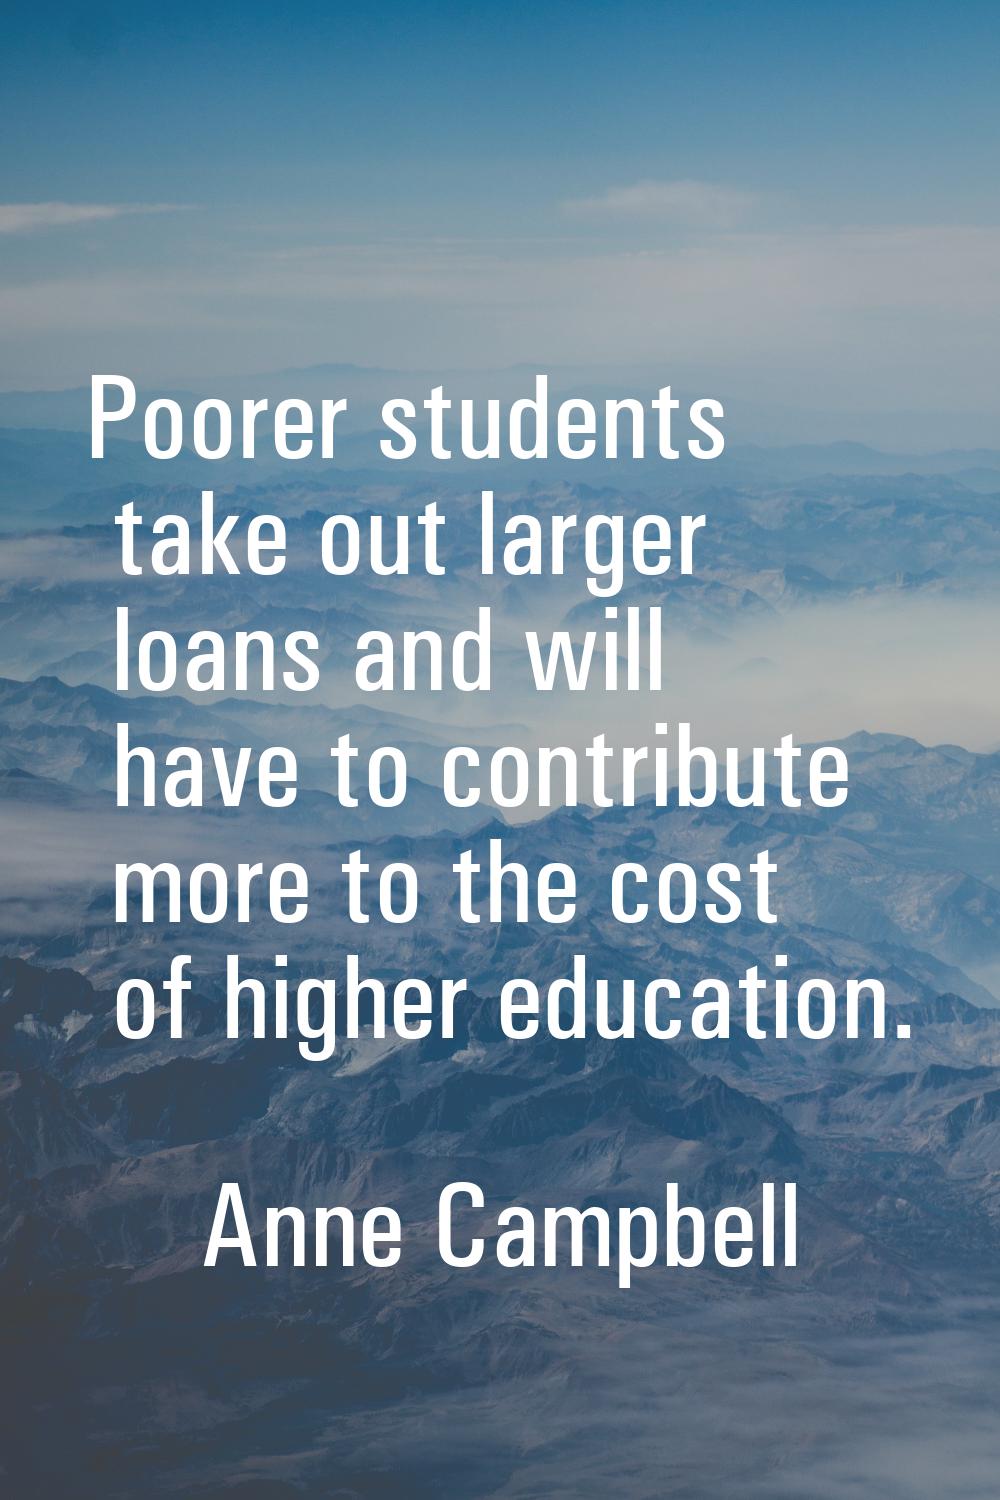 Poorer students take out larger loans and will have to contribute more to the cost of higher educat